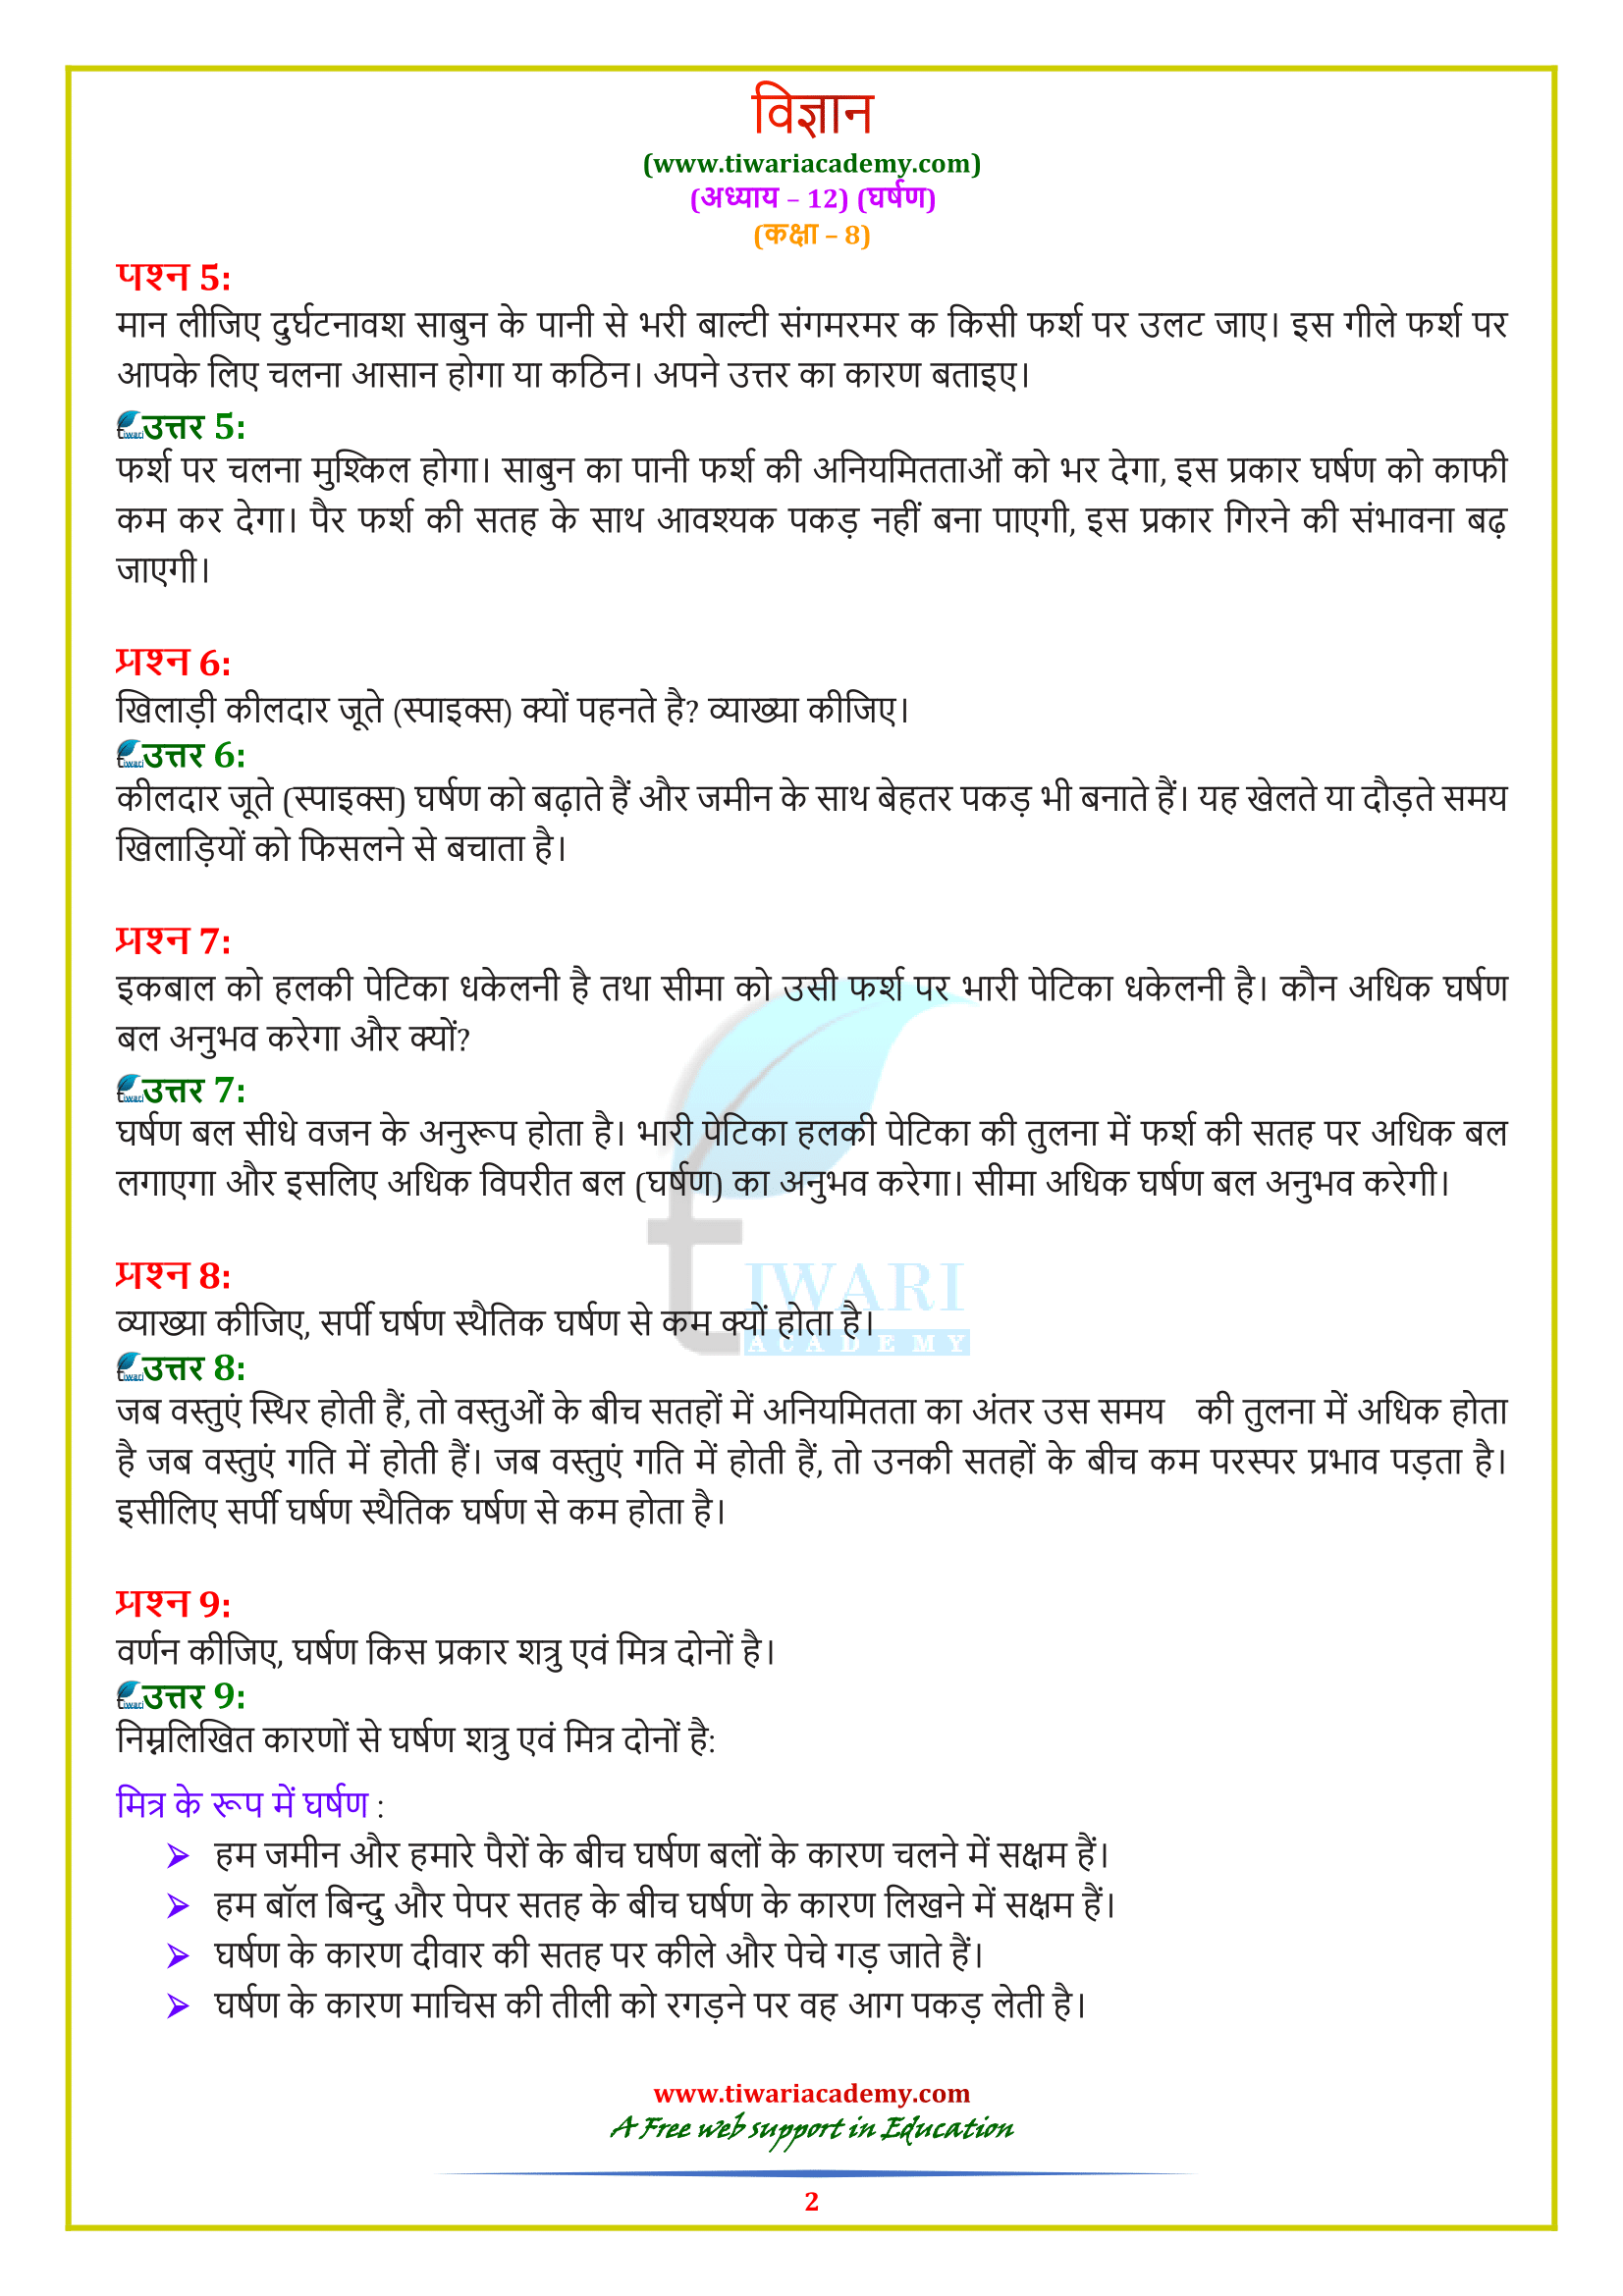 NCERT Solutions for Class 8 Science Chapter 12 in Hindi Medium